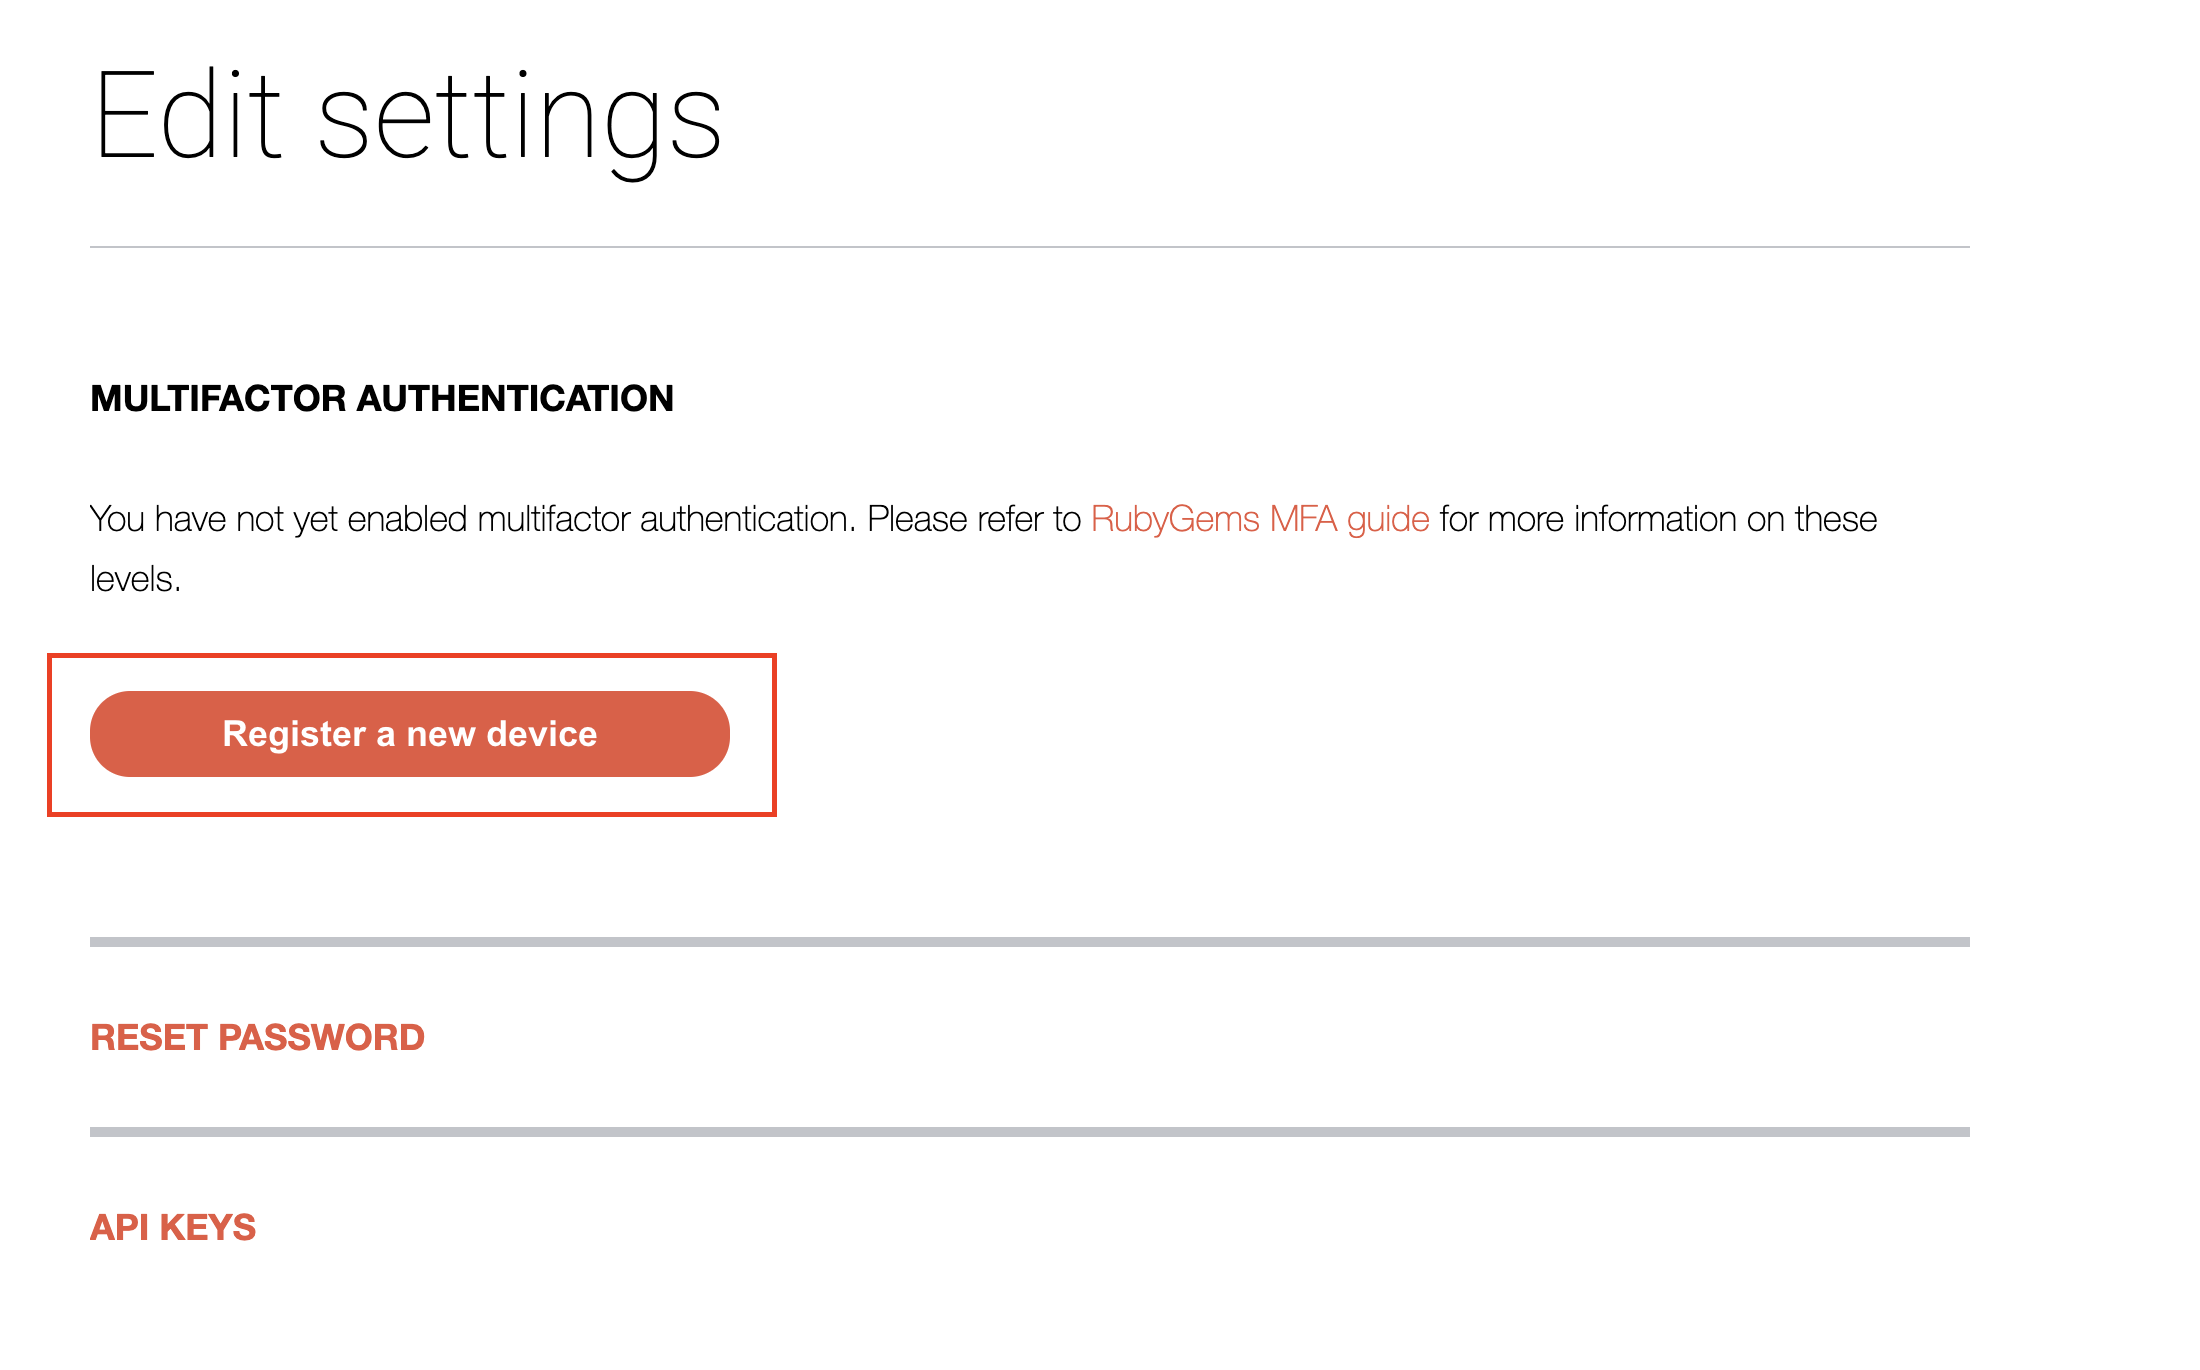 Multifactor authentication section on the edit settings page